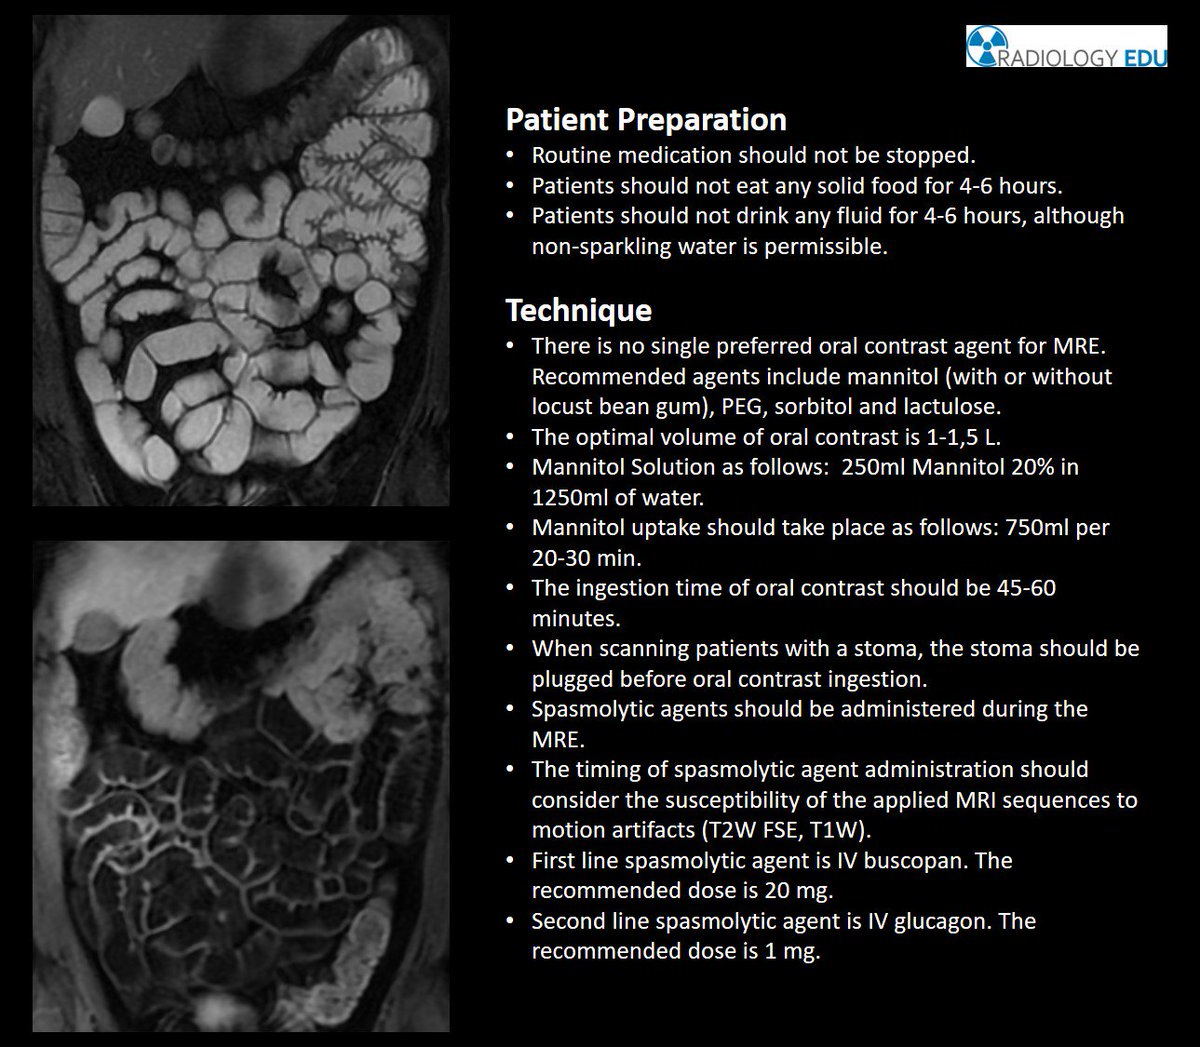 MRE patient preparation and technique.
More information about MR Protocol and slice positioning here: myradiologyedu.com/body-positioni…
#radiologyedu #myradiologyedu #radiologyeducation #myradiologyeducation #radiology #MRI #MRE #enterography #smallbowel #Radiographer #MRI_Technologist